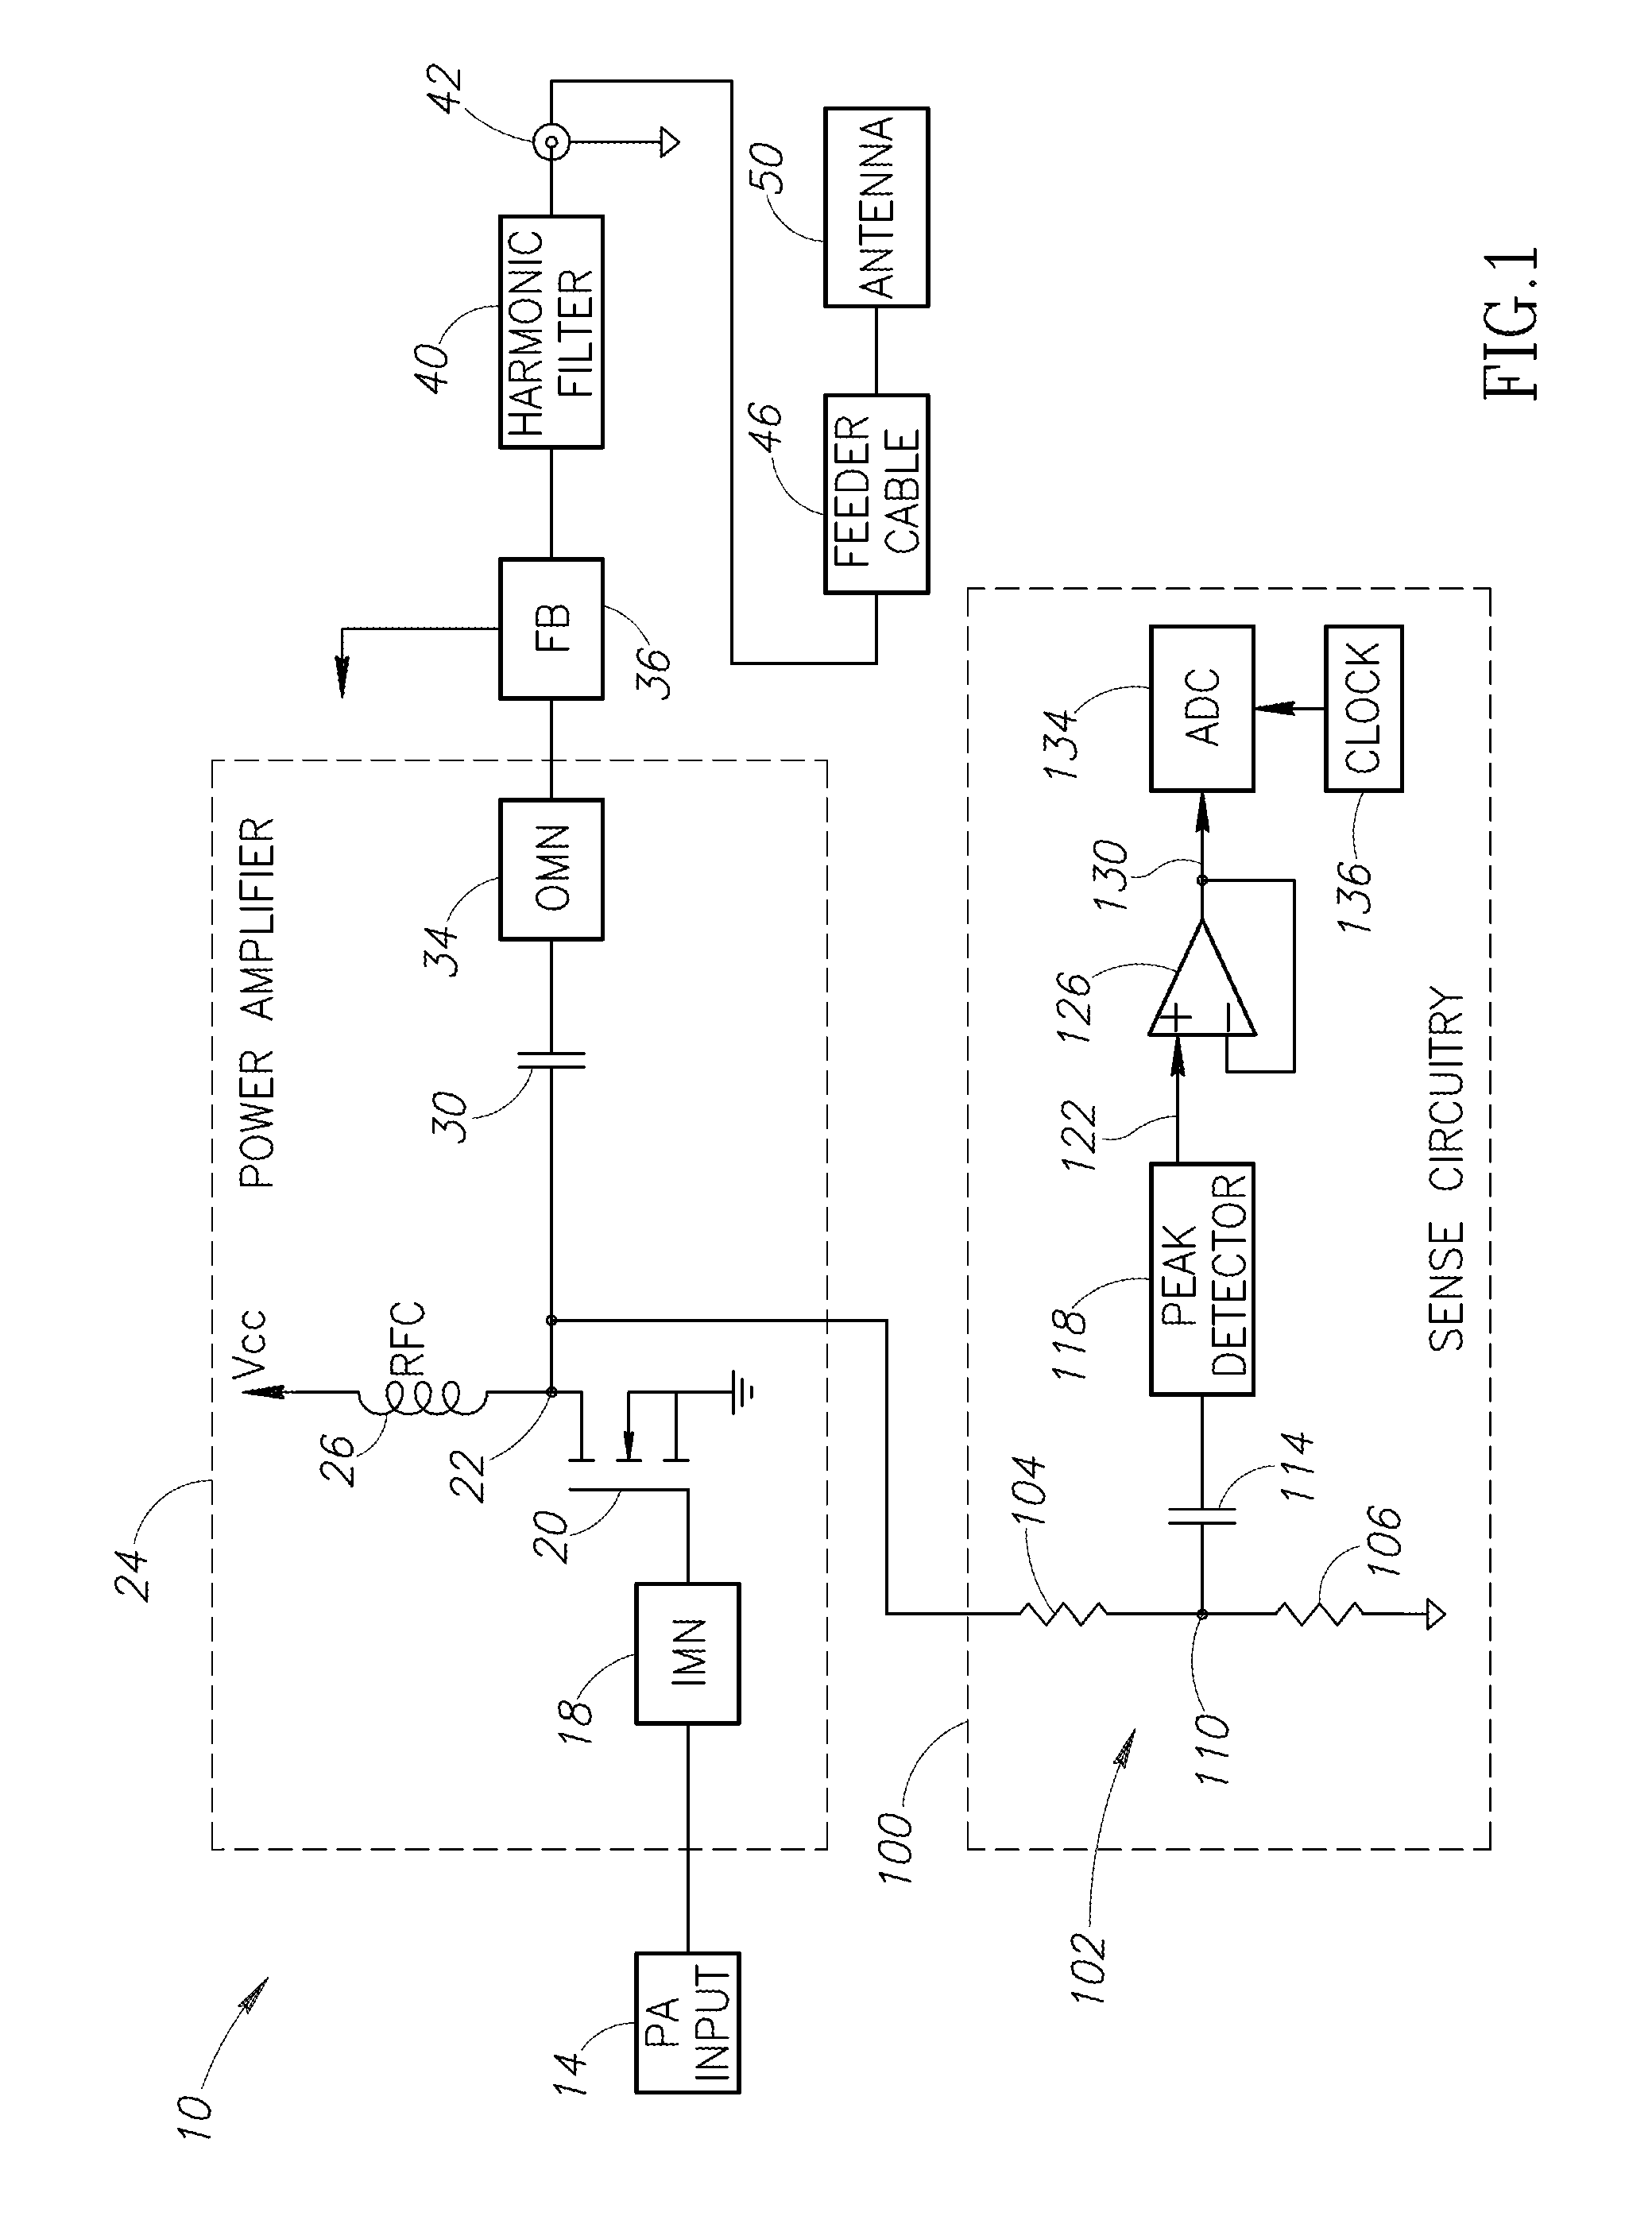 Radio frequency power amplifier protection system